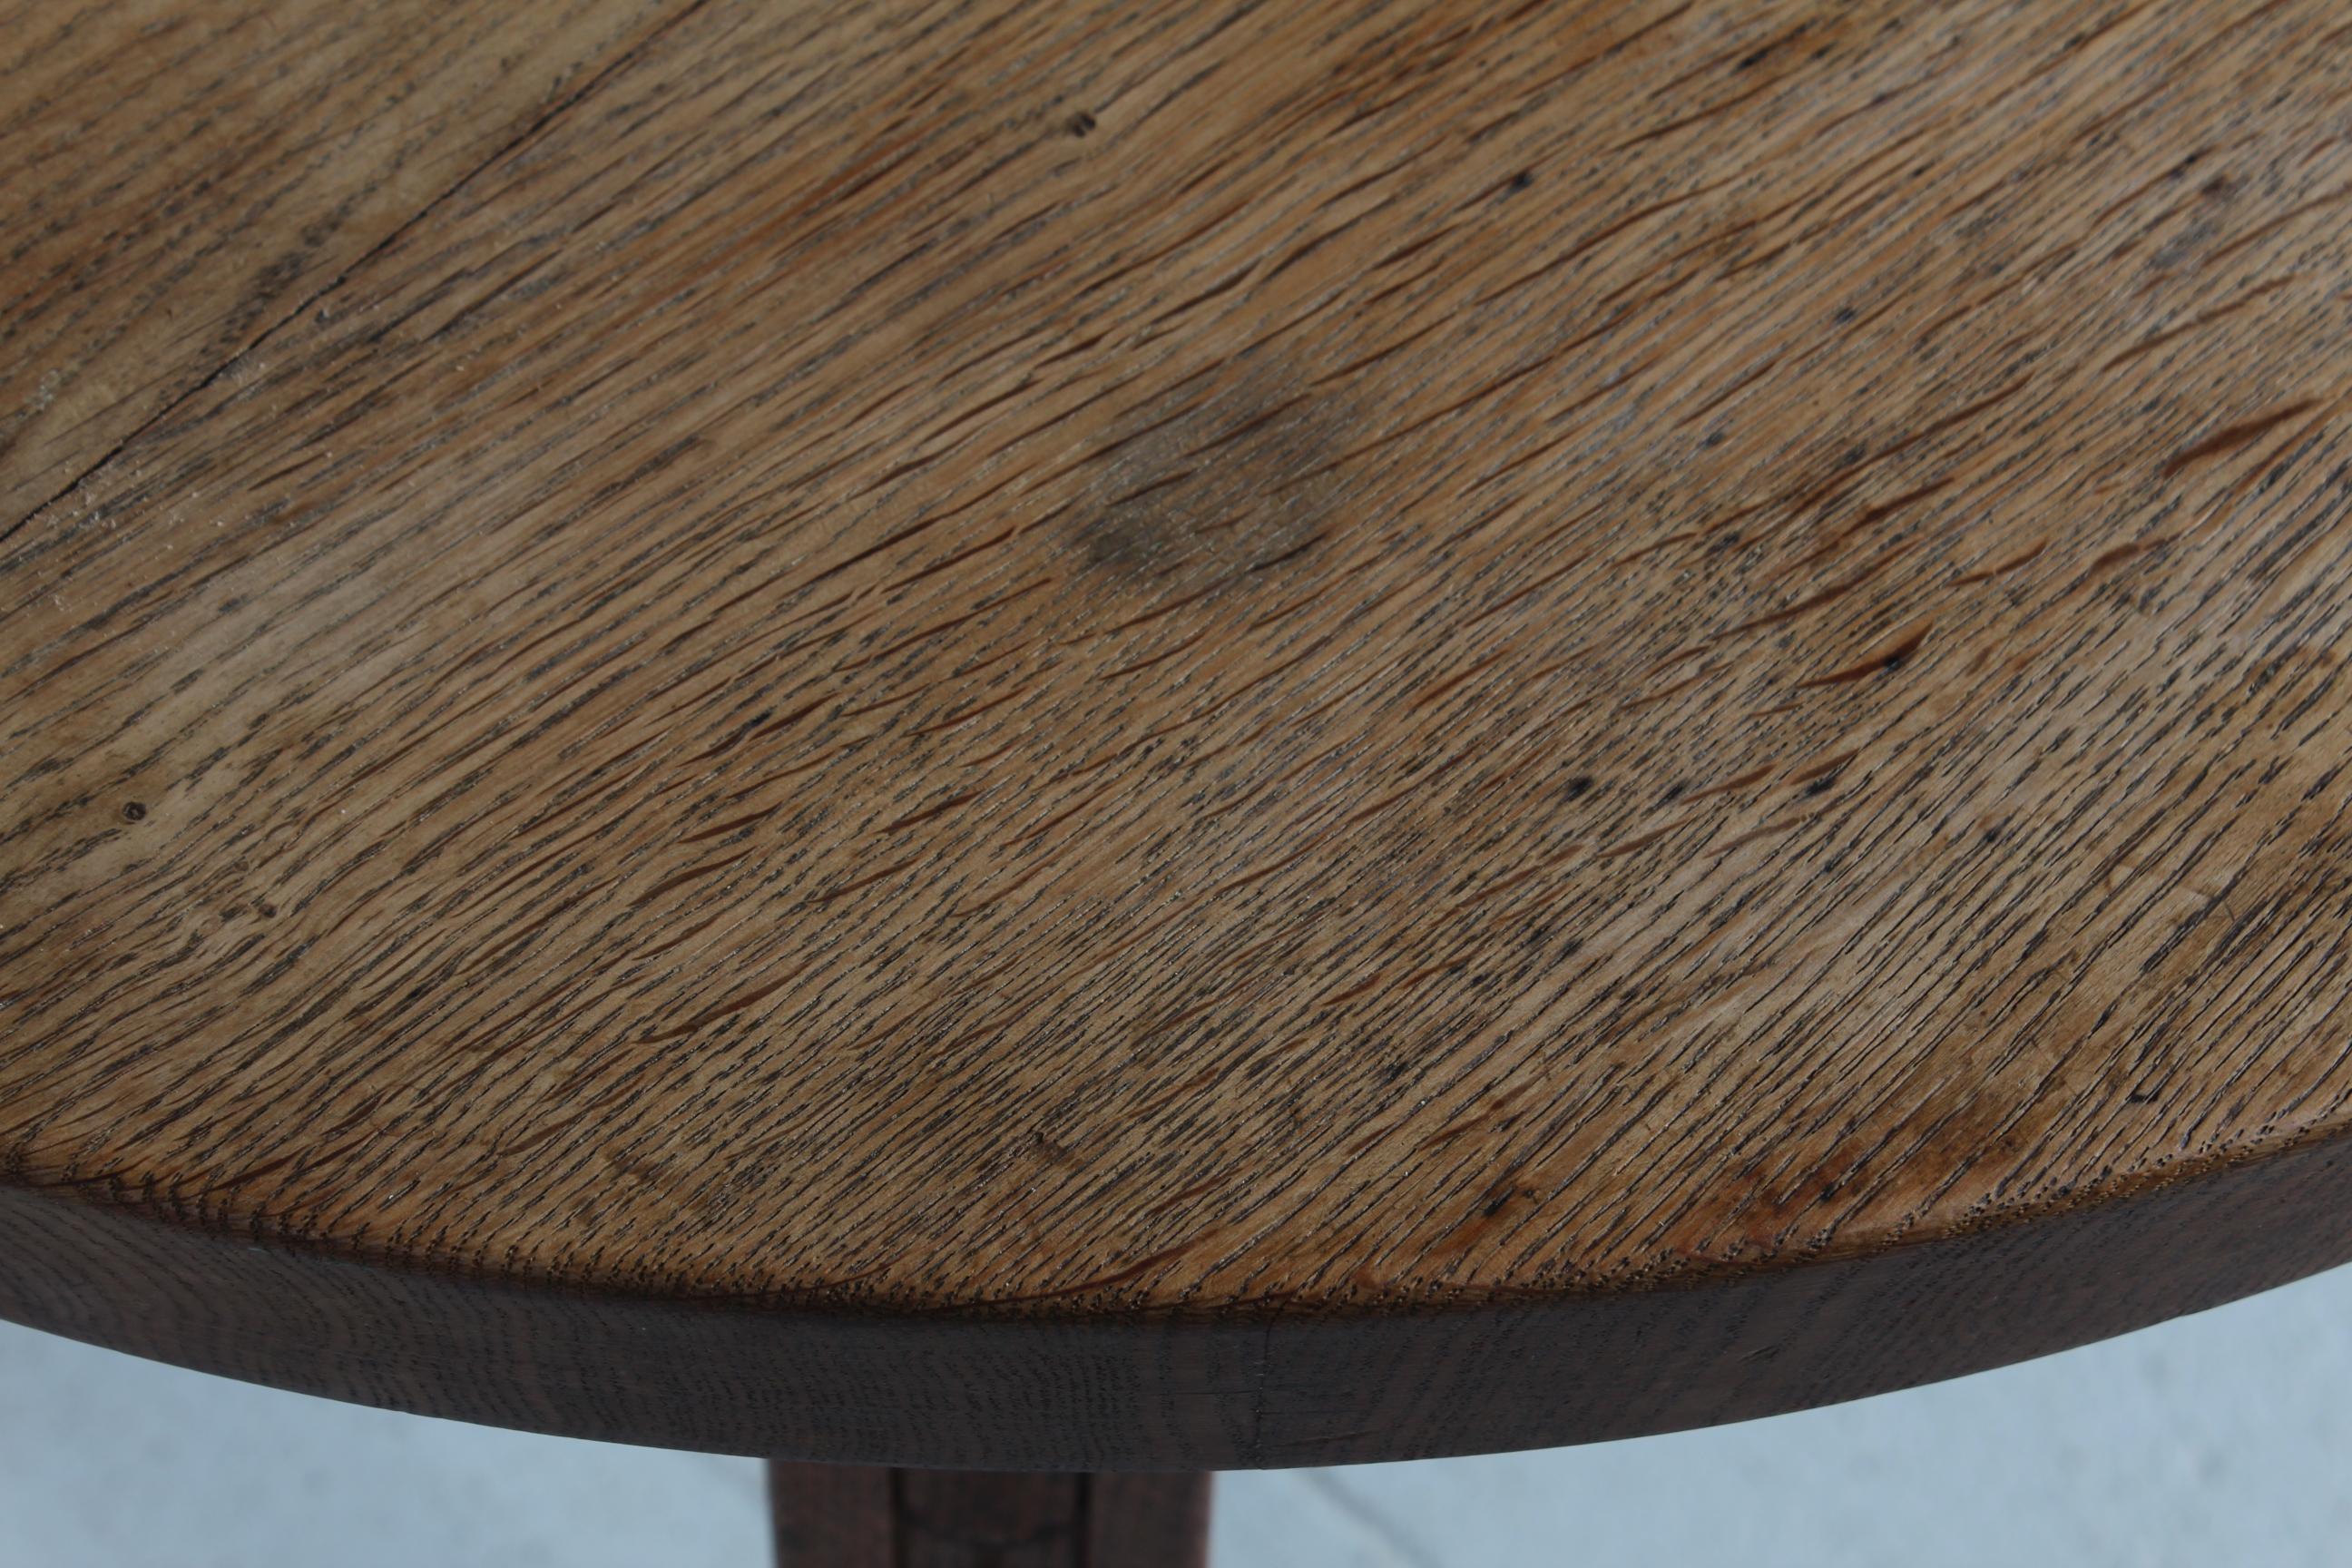 Danish Midcentury Brutalist Round Coffee Table of Solid Oak by Cabinetmaker 1950 For Sale 2